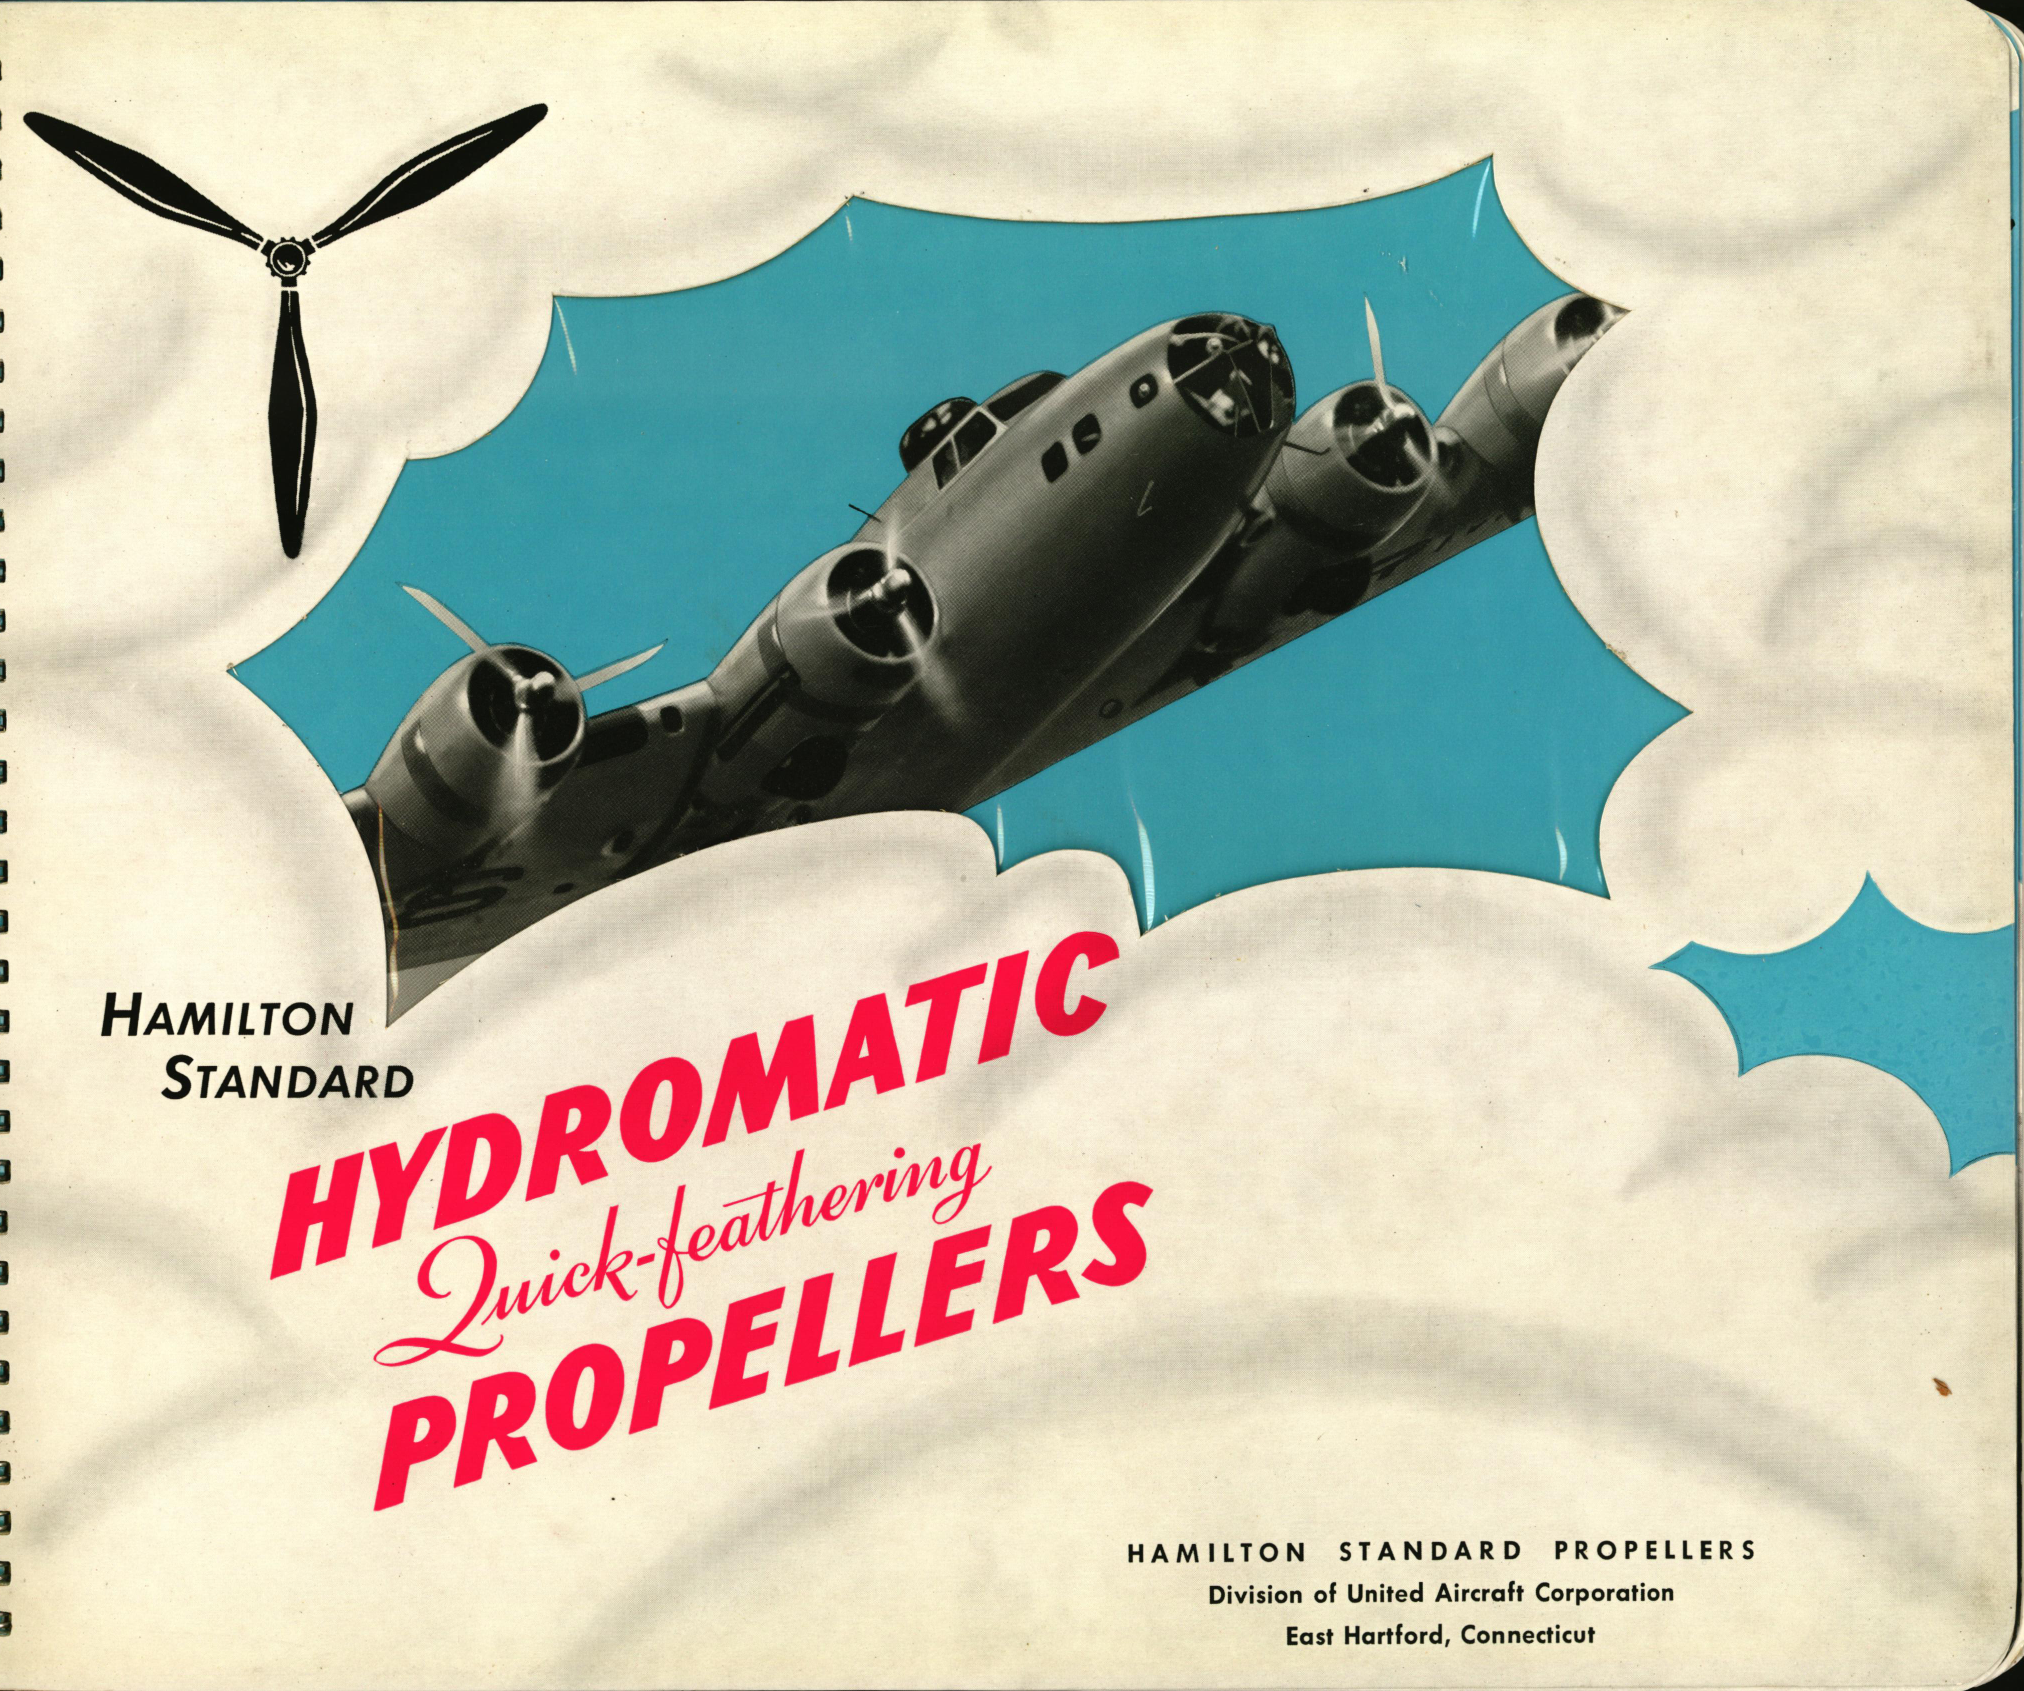 Sample page 2 from AirCorps Library document: Hamilton Standard Hydromatic Quick-Feathering Propellers